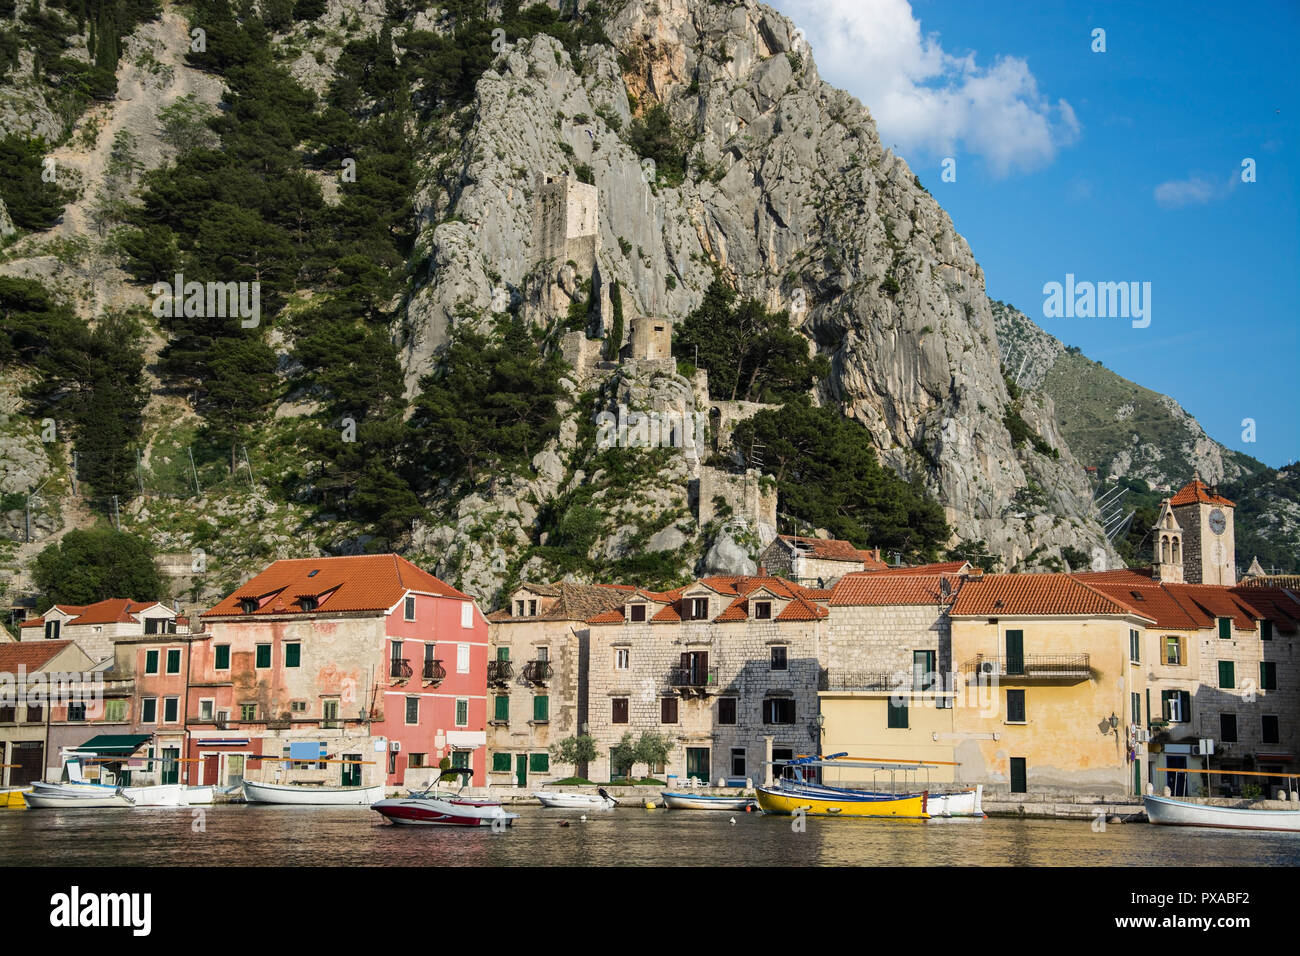 Omis is a town and port in the Dalmatia region of Croatia. Its location is where the Cetina River meets the Adriatic Sea. Stock Photo